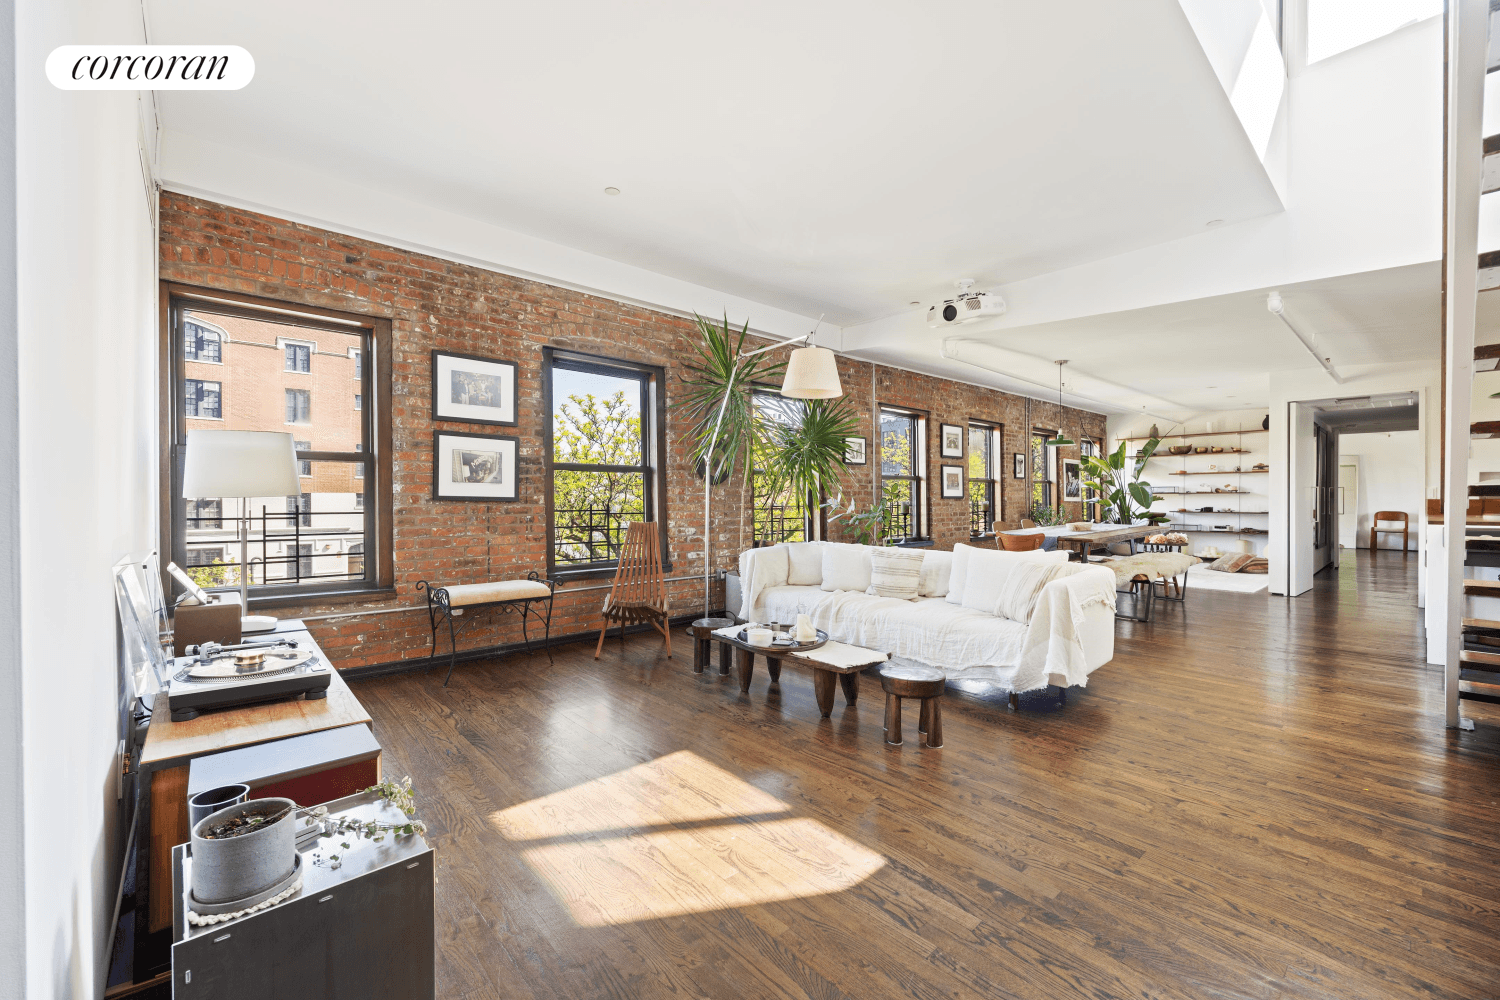 Introducing an unparalleled opportunity to embrace the epitome of Brooklyn living at its absolute finest indulge in the Brooklyn dream in this quintessential Williamsburg Loft !